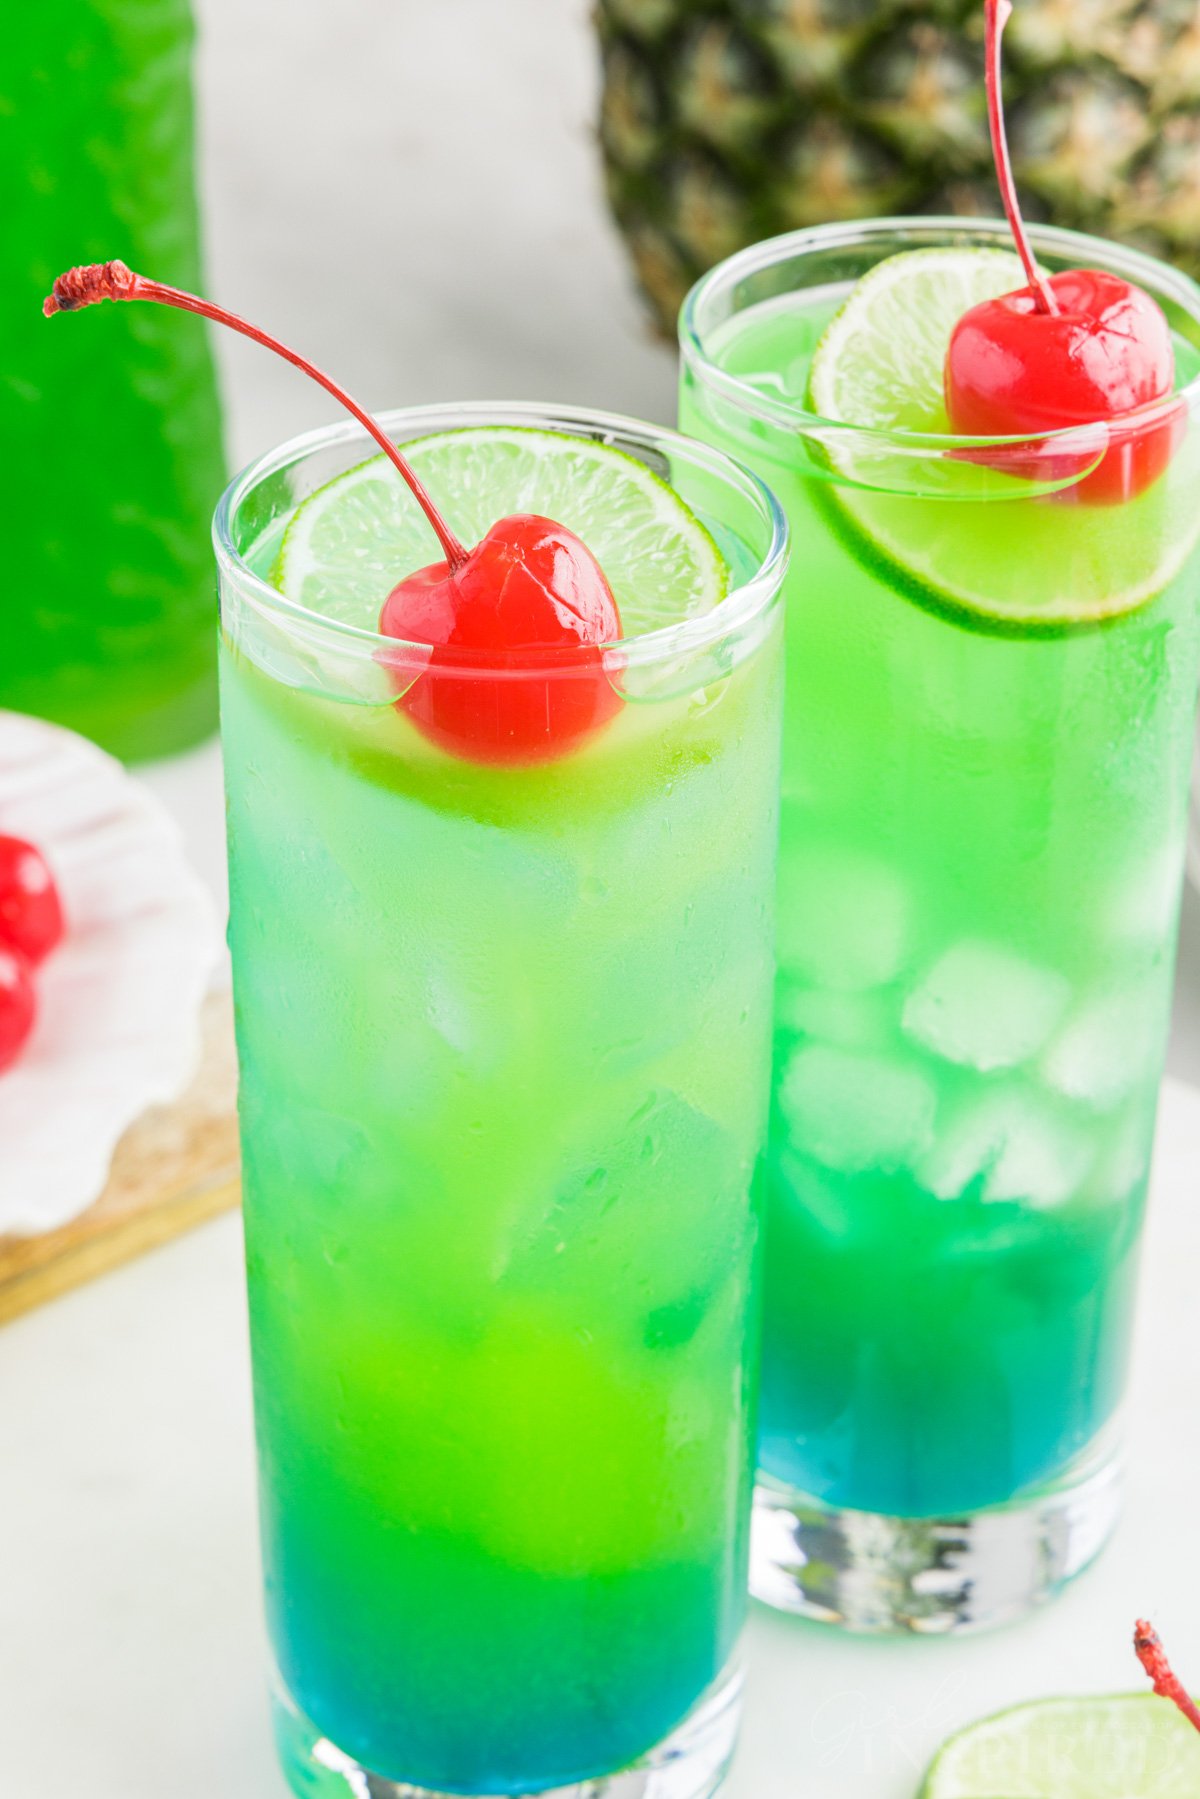 Finished tipsy mermaid drinks in glasses with lime round and maraschino cherry on top.